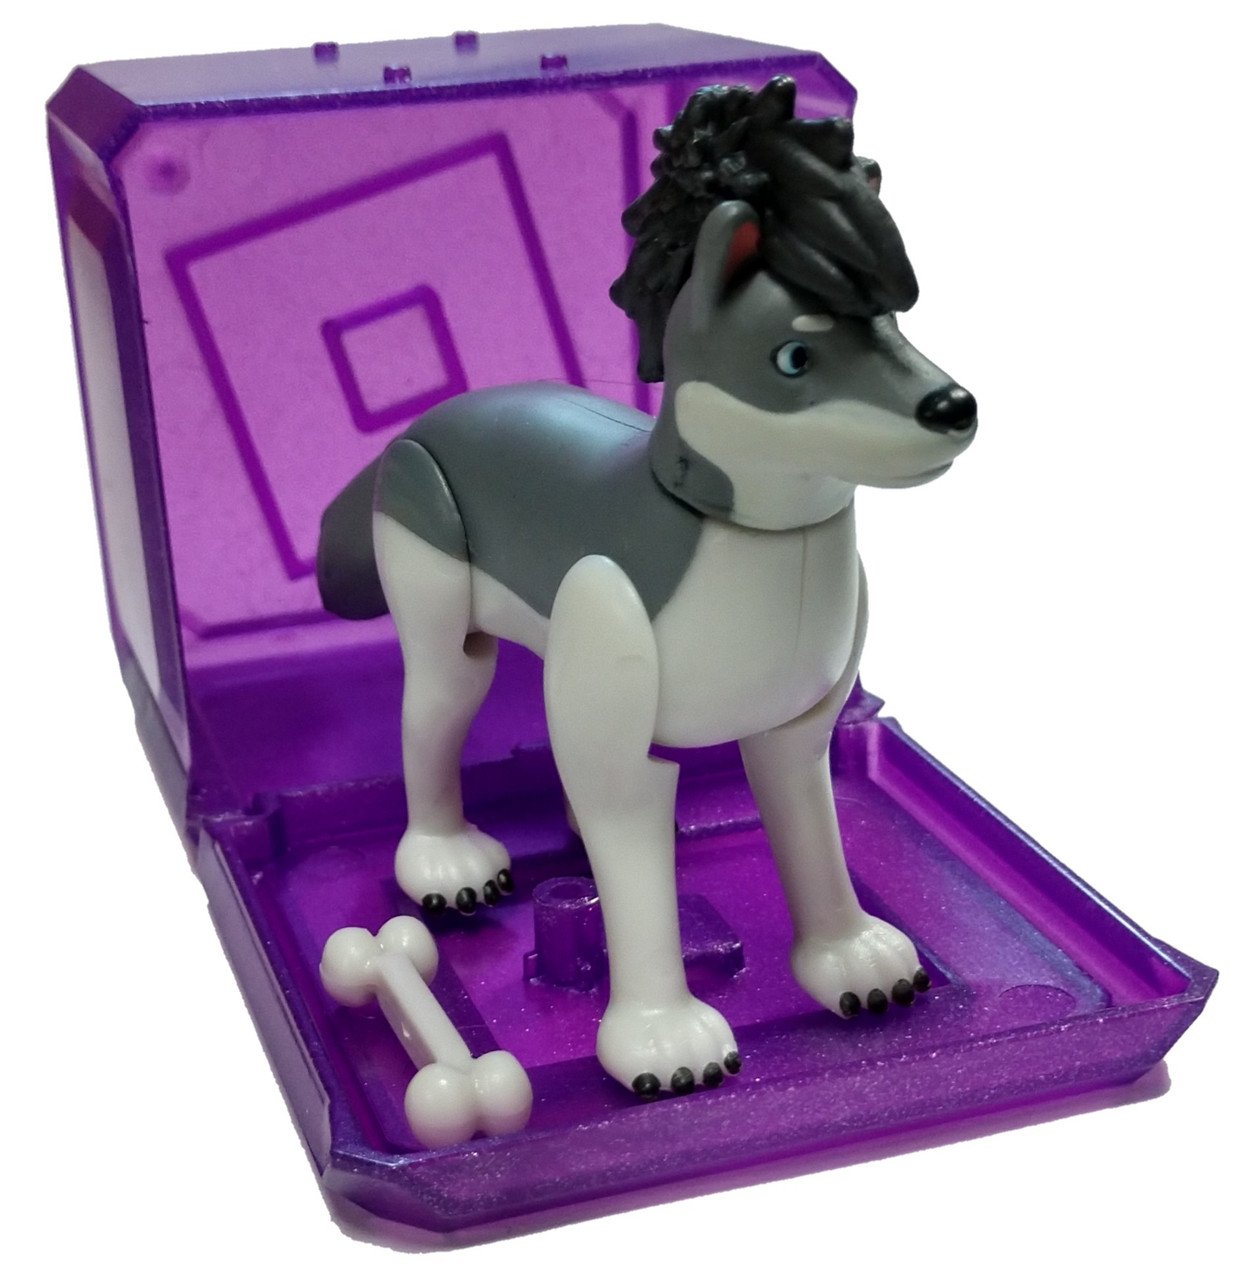 Roblox Celebrity Collection Series 3 Wolves Life 3 Pup 3 Mini Figure With Cube And Online Code Loose Jazwares Toywiz - codes for view music for wolves life 3 roblox